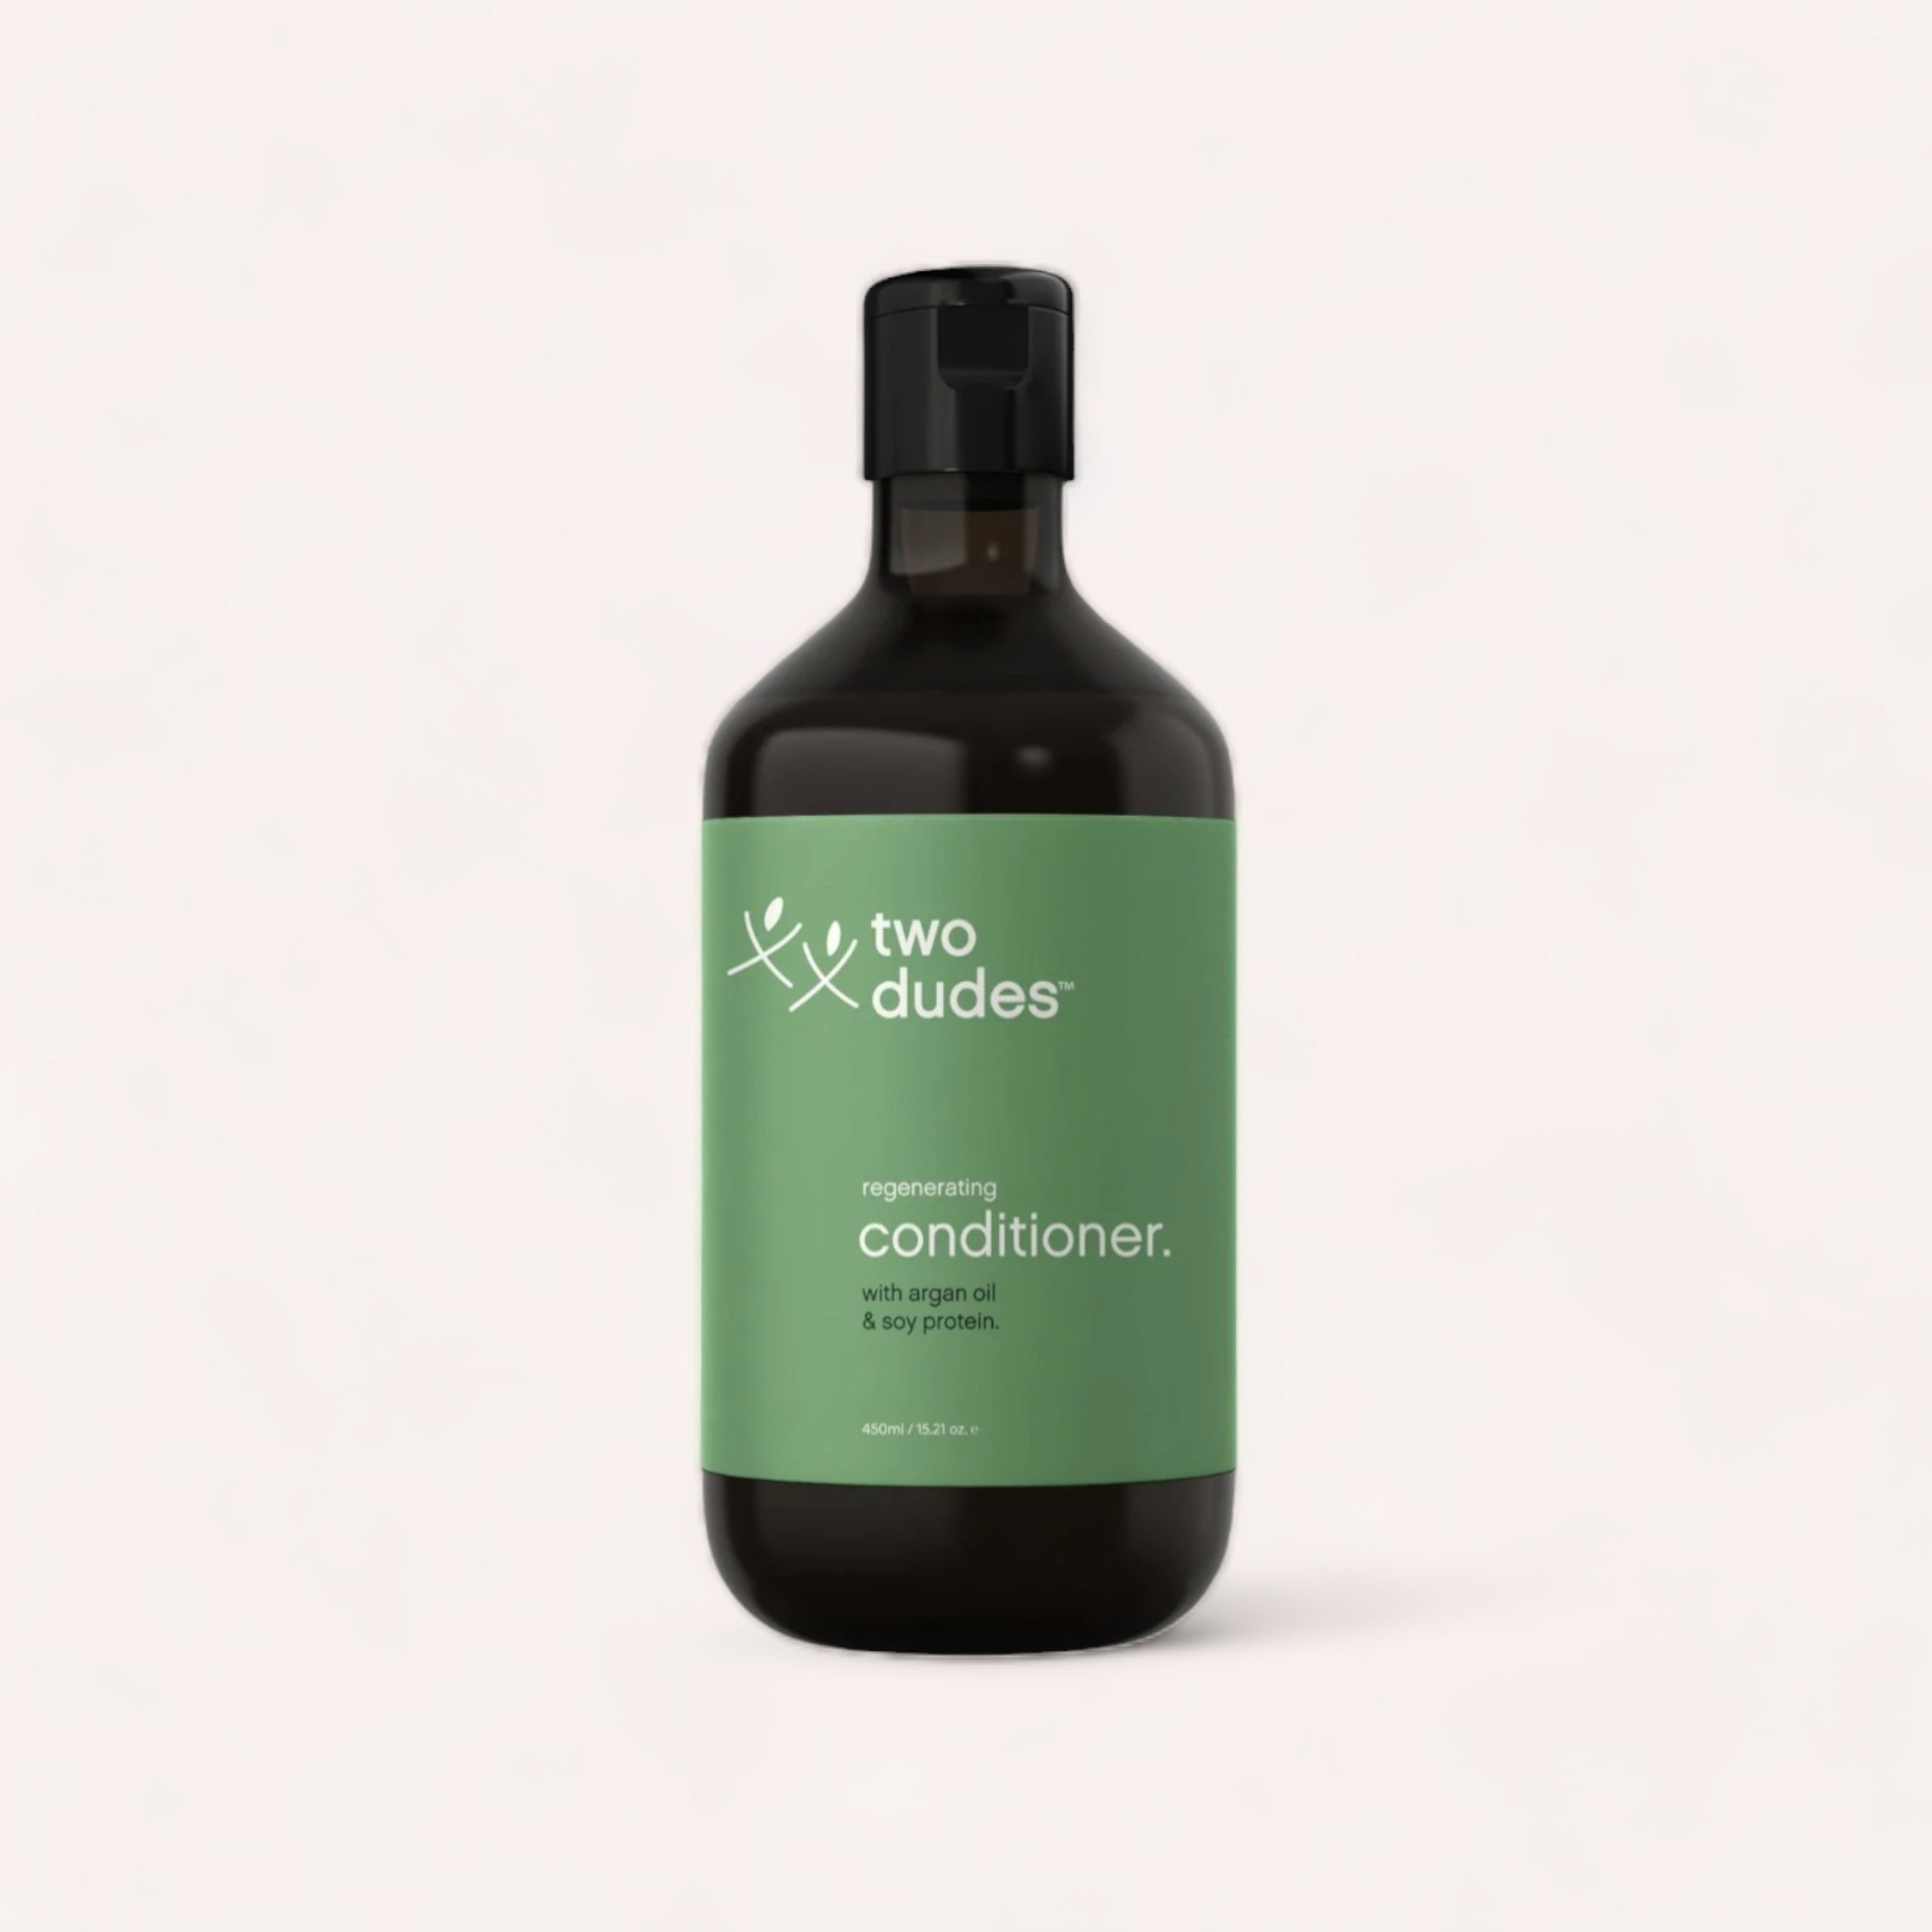 A minimalist-designed bottle of Conditioner by Two Dudes with argan oil and soy protein against a plain background.